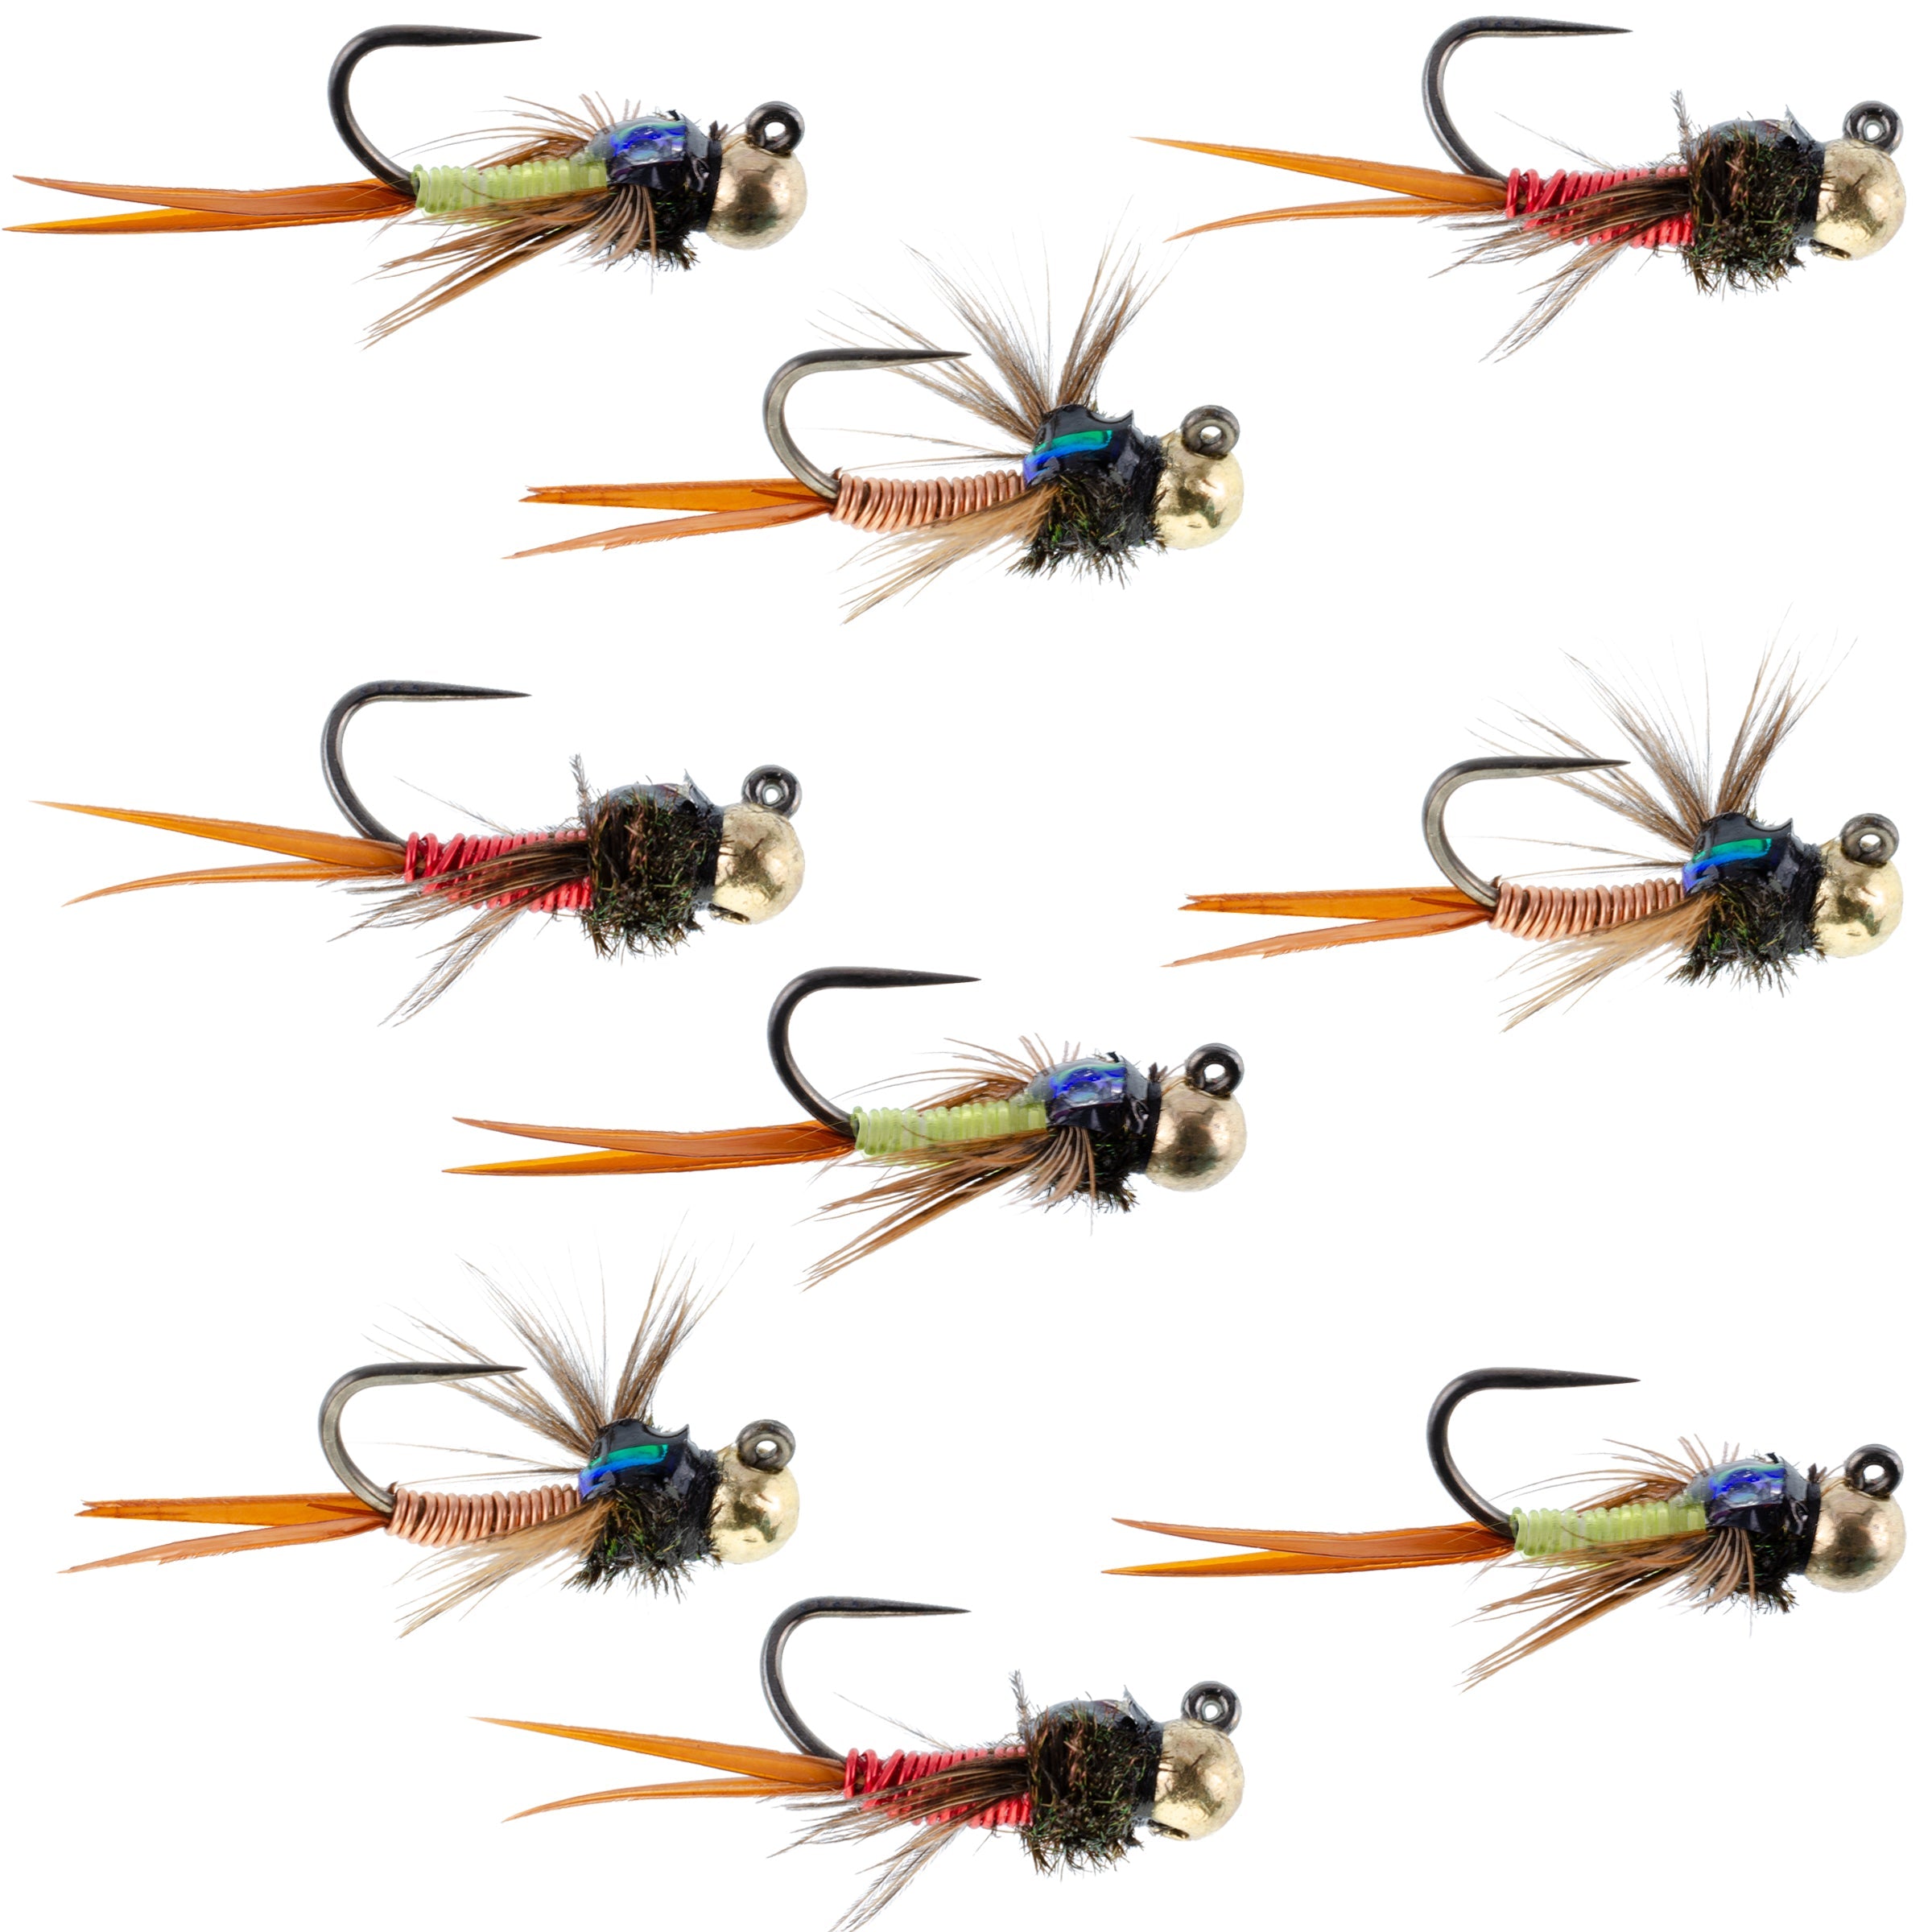 Tactical Tungsten Bead Head Copper John Euro Nymph Assortment Fly Fishing Flies - Collection of 9 Flies 3 Colors Hook Size 14